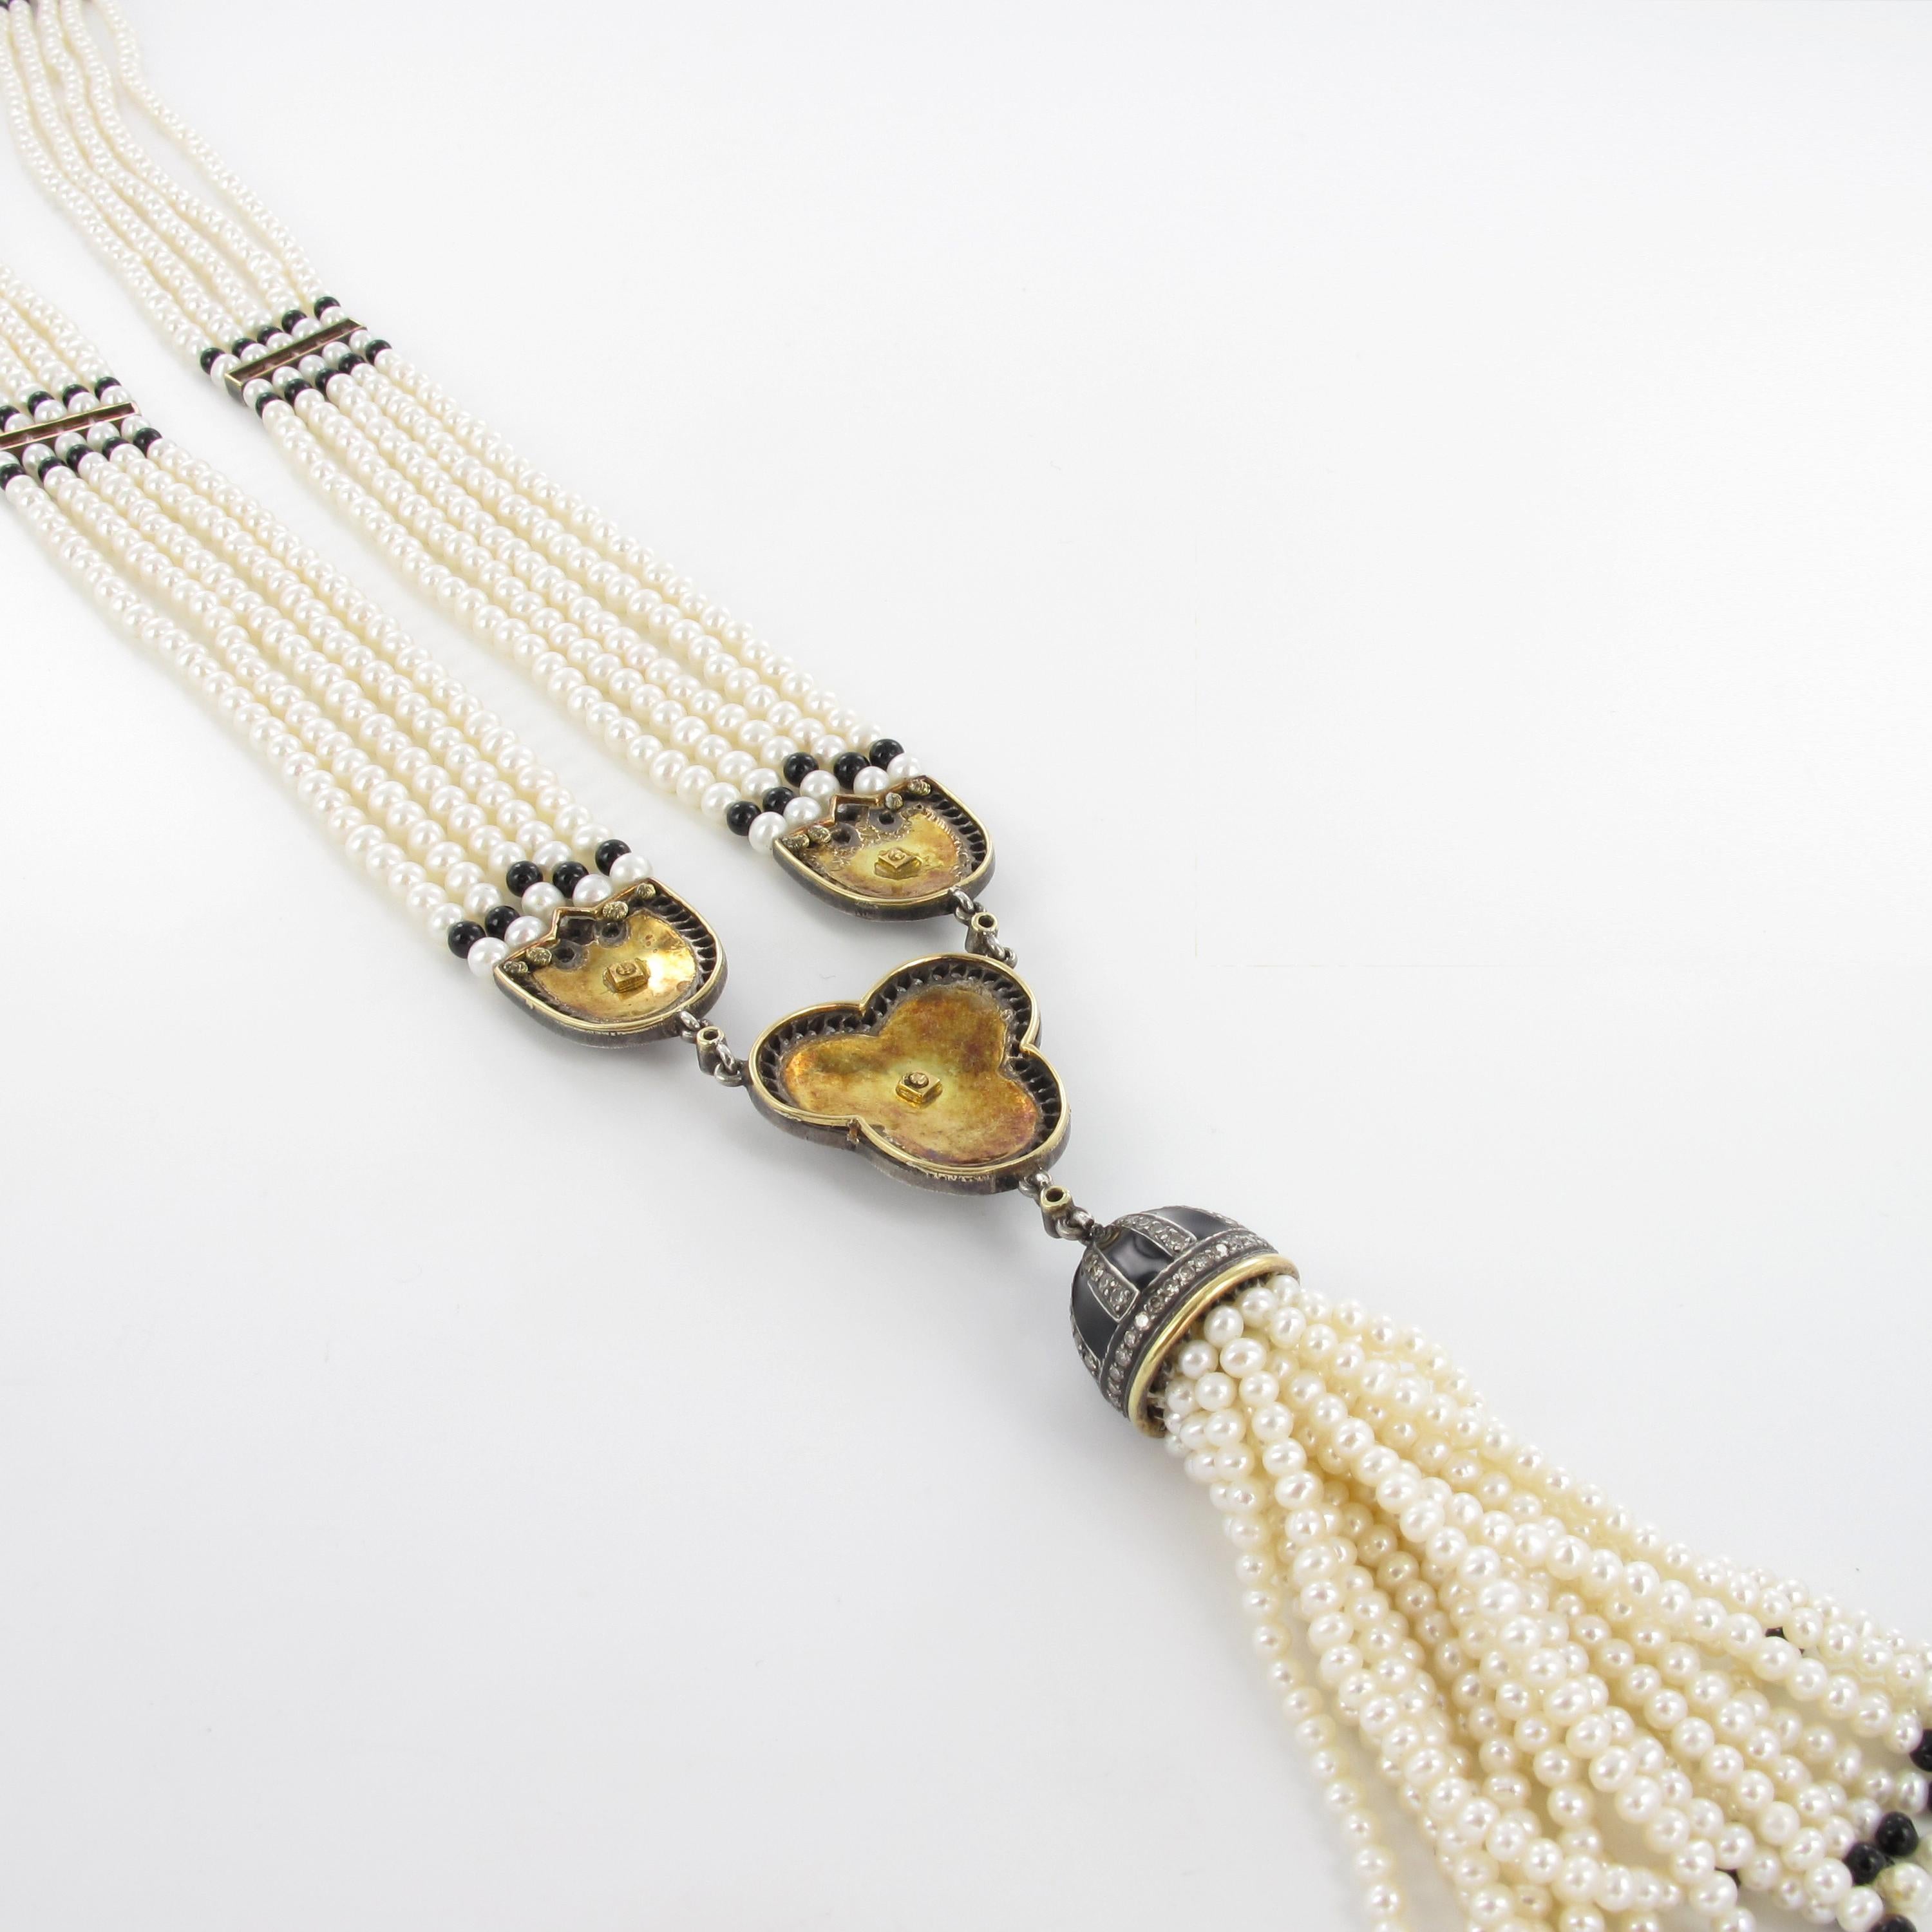 Decorative 5-Strand Cultured Pearl Necklace with Diamonds in Silver-Topped Gold In Good Condition For Sale In Lucerne, CH